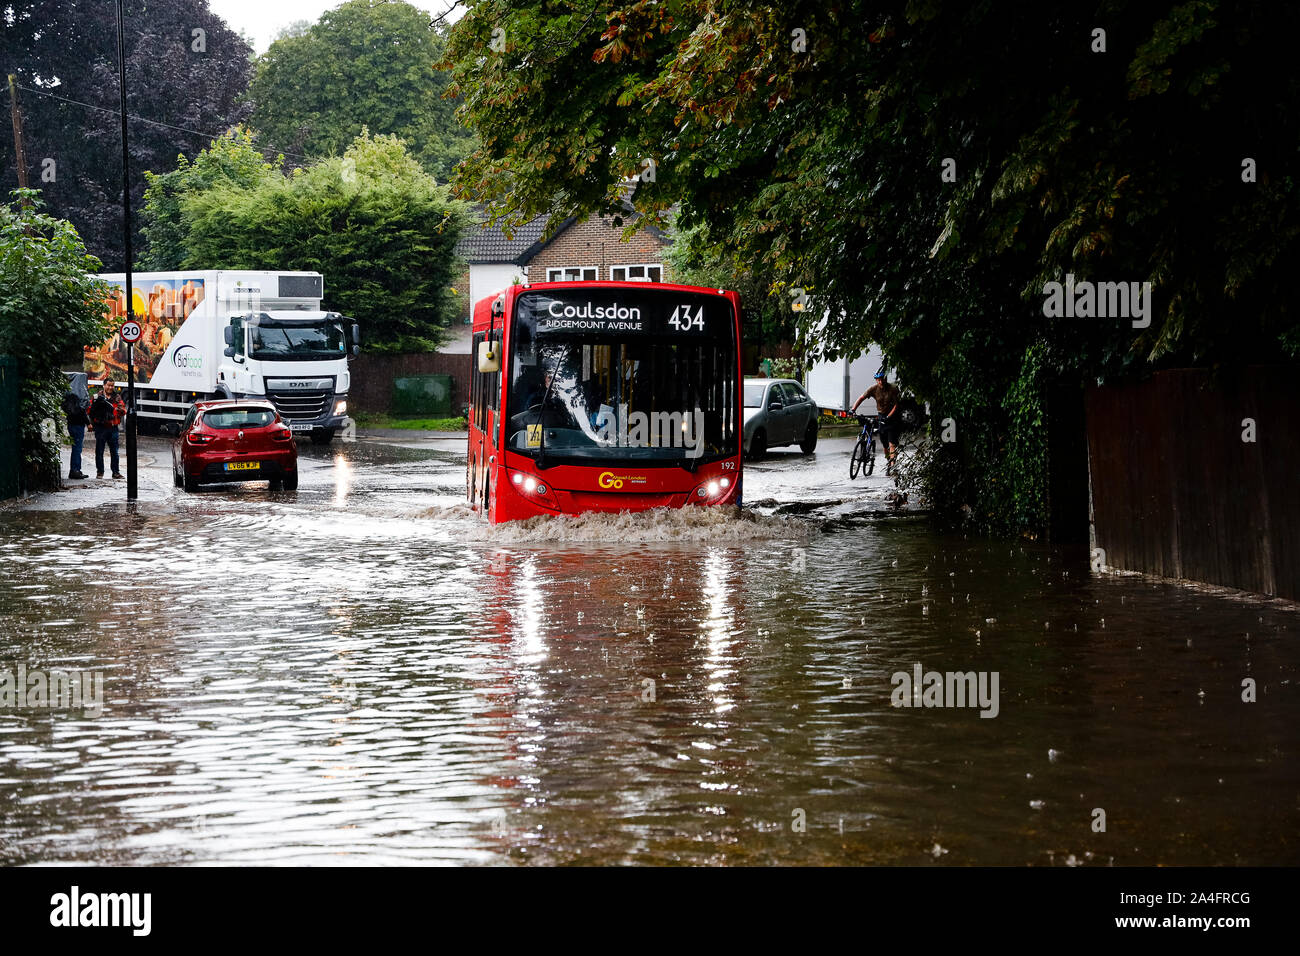 London, UK. A red bus splashes through flood water in Kenley, south London, after torrential rain caused the road to flood in under half an hour. Stock Photo